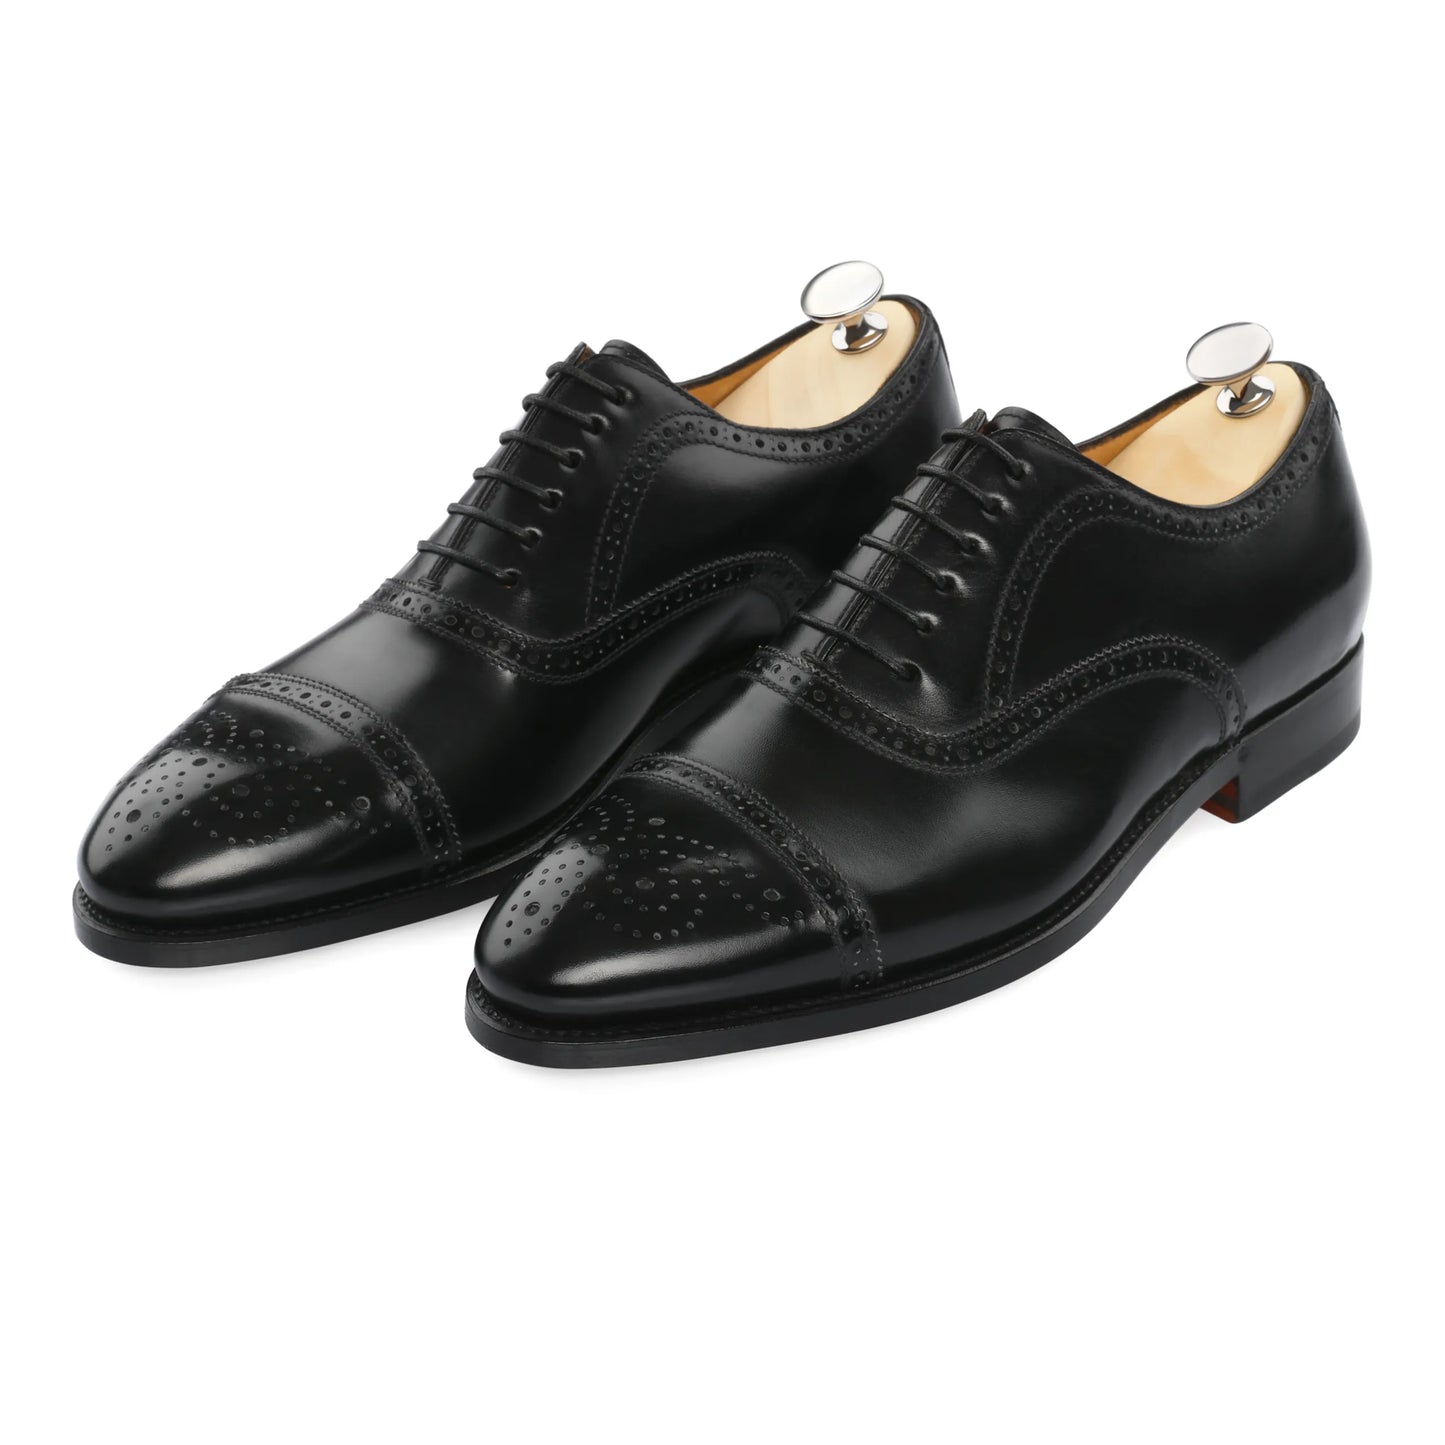 «Bellantonio» Six-Eyelet Leather Oxford Shoes with Perforated Details and Medallion in Nero Black